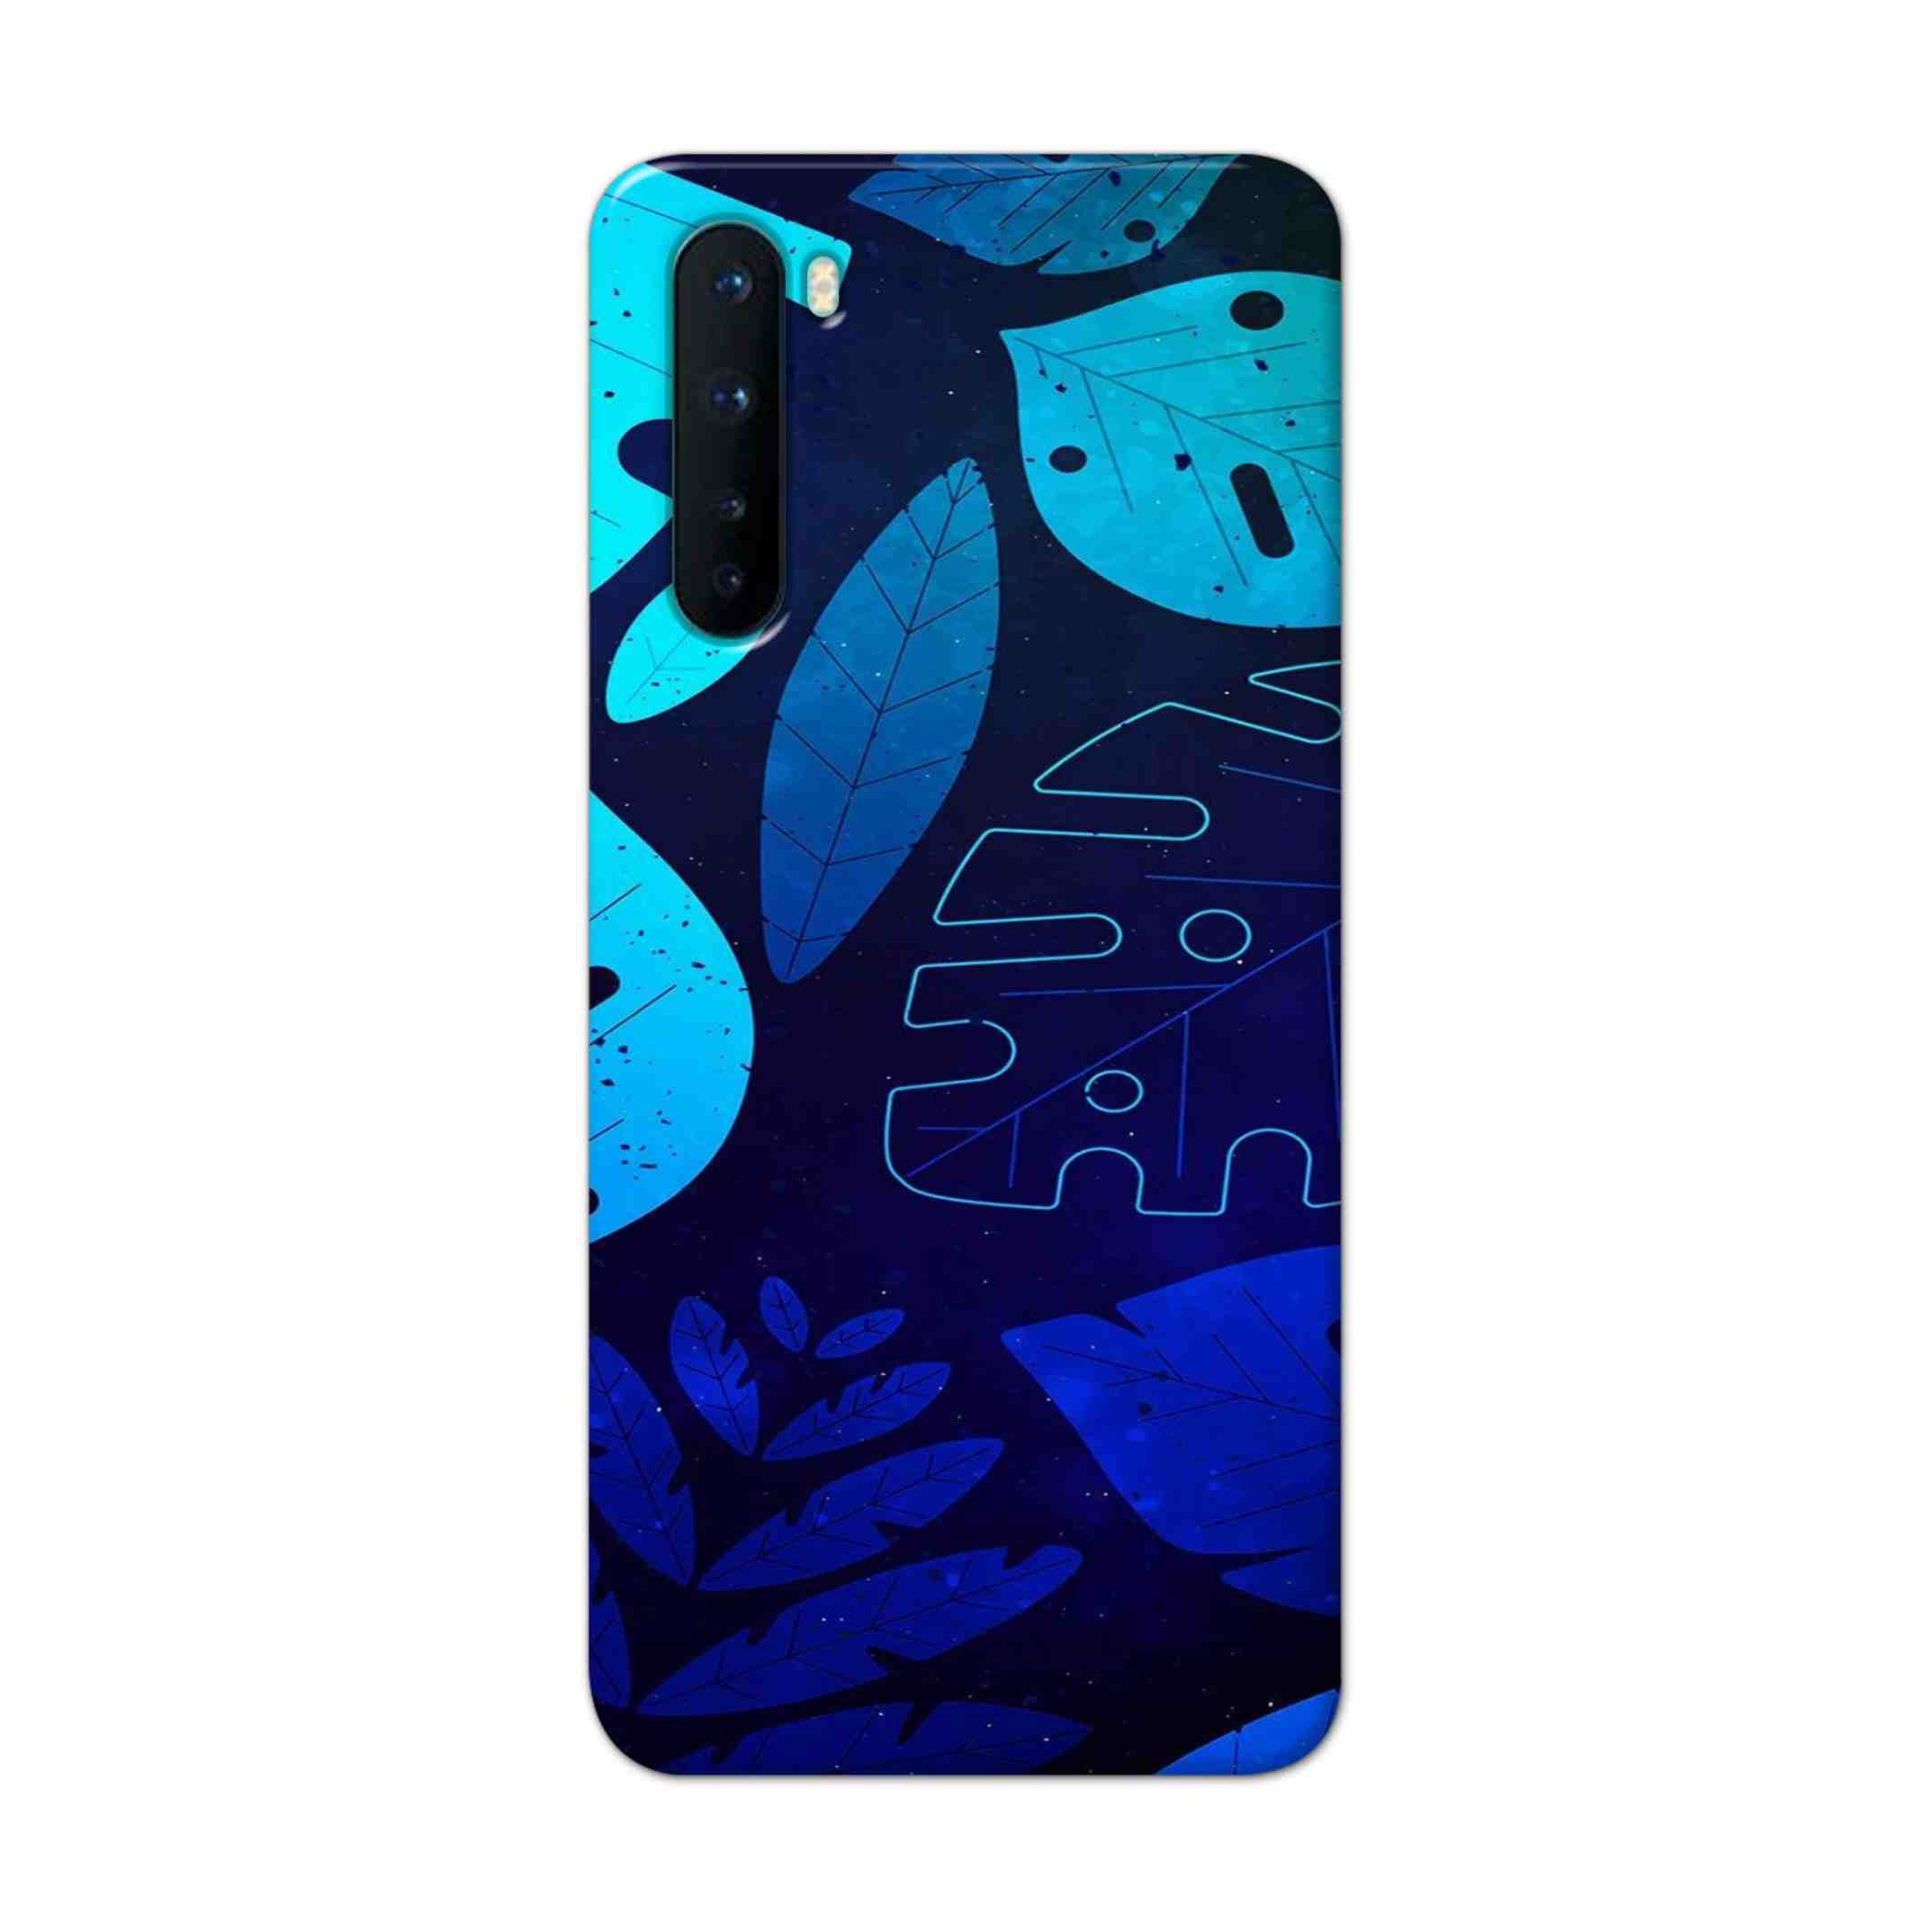 Buy Neon Leaf Hard Back Mobile Phone Case Cover For OnePlus Nord Online